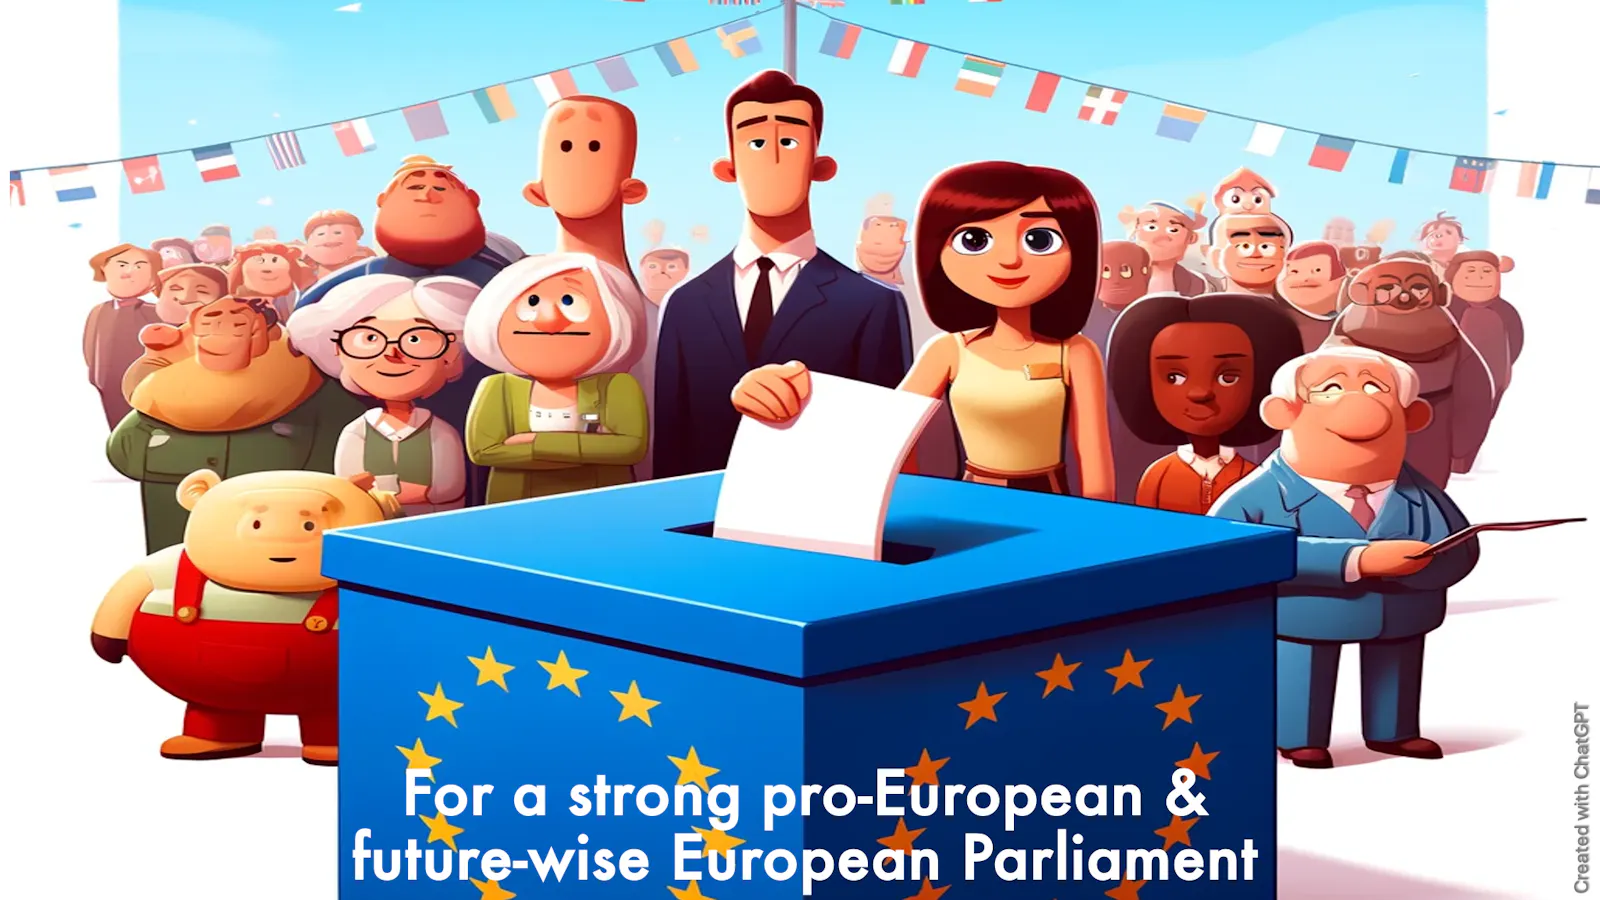 All I want is a strong pro-European and future-wise European Parliament